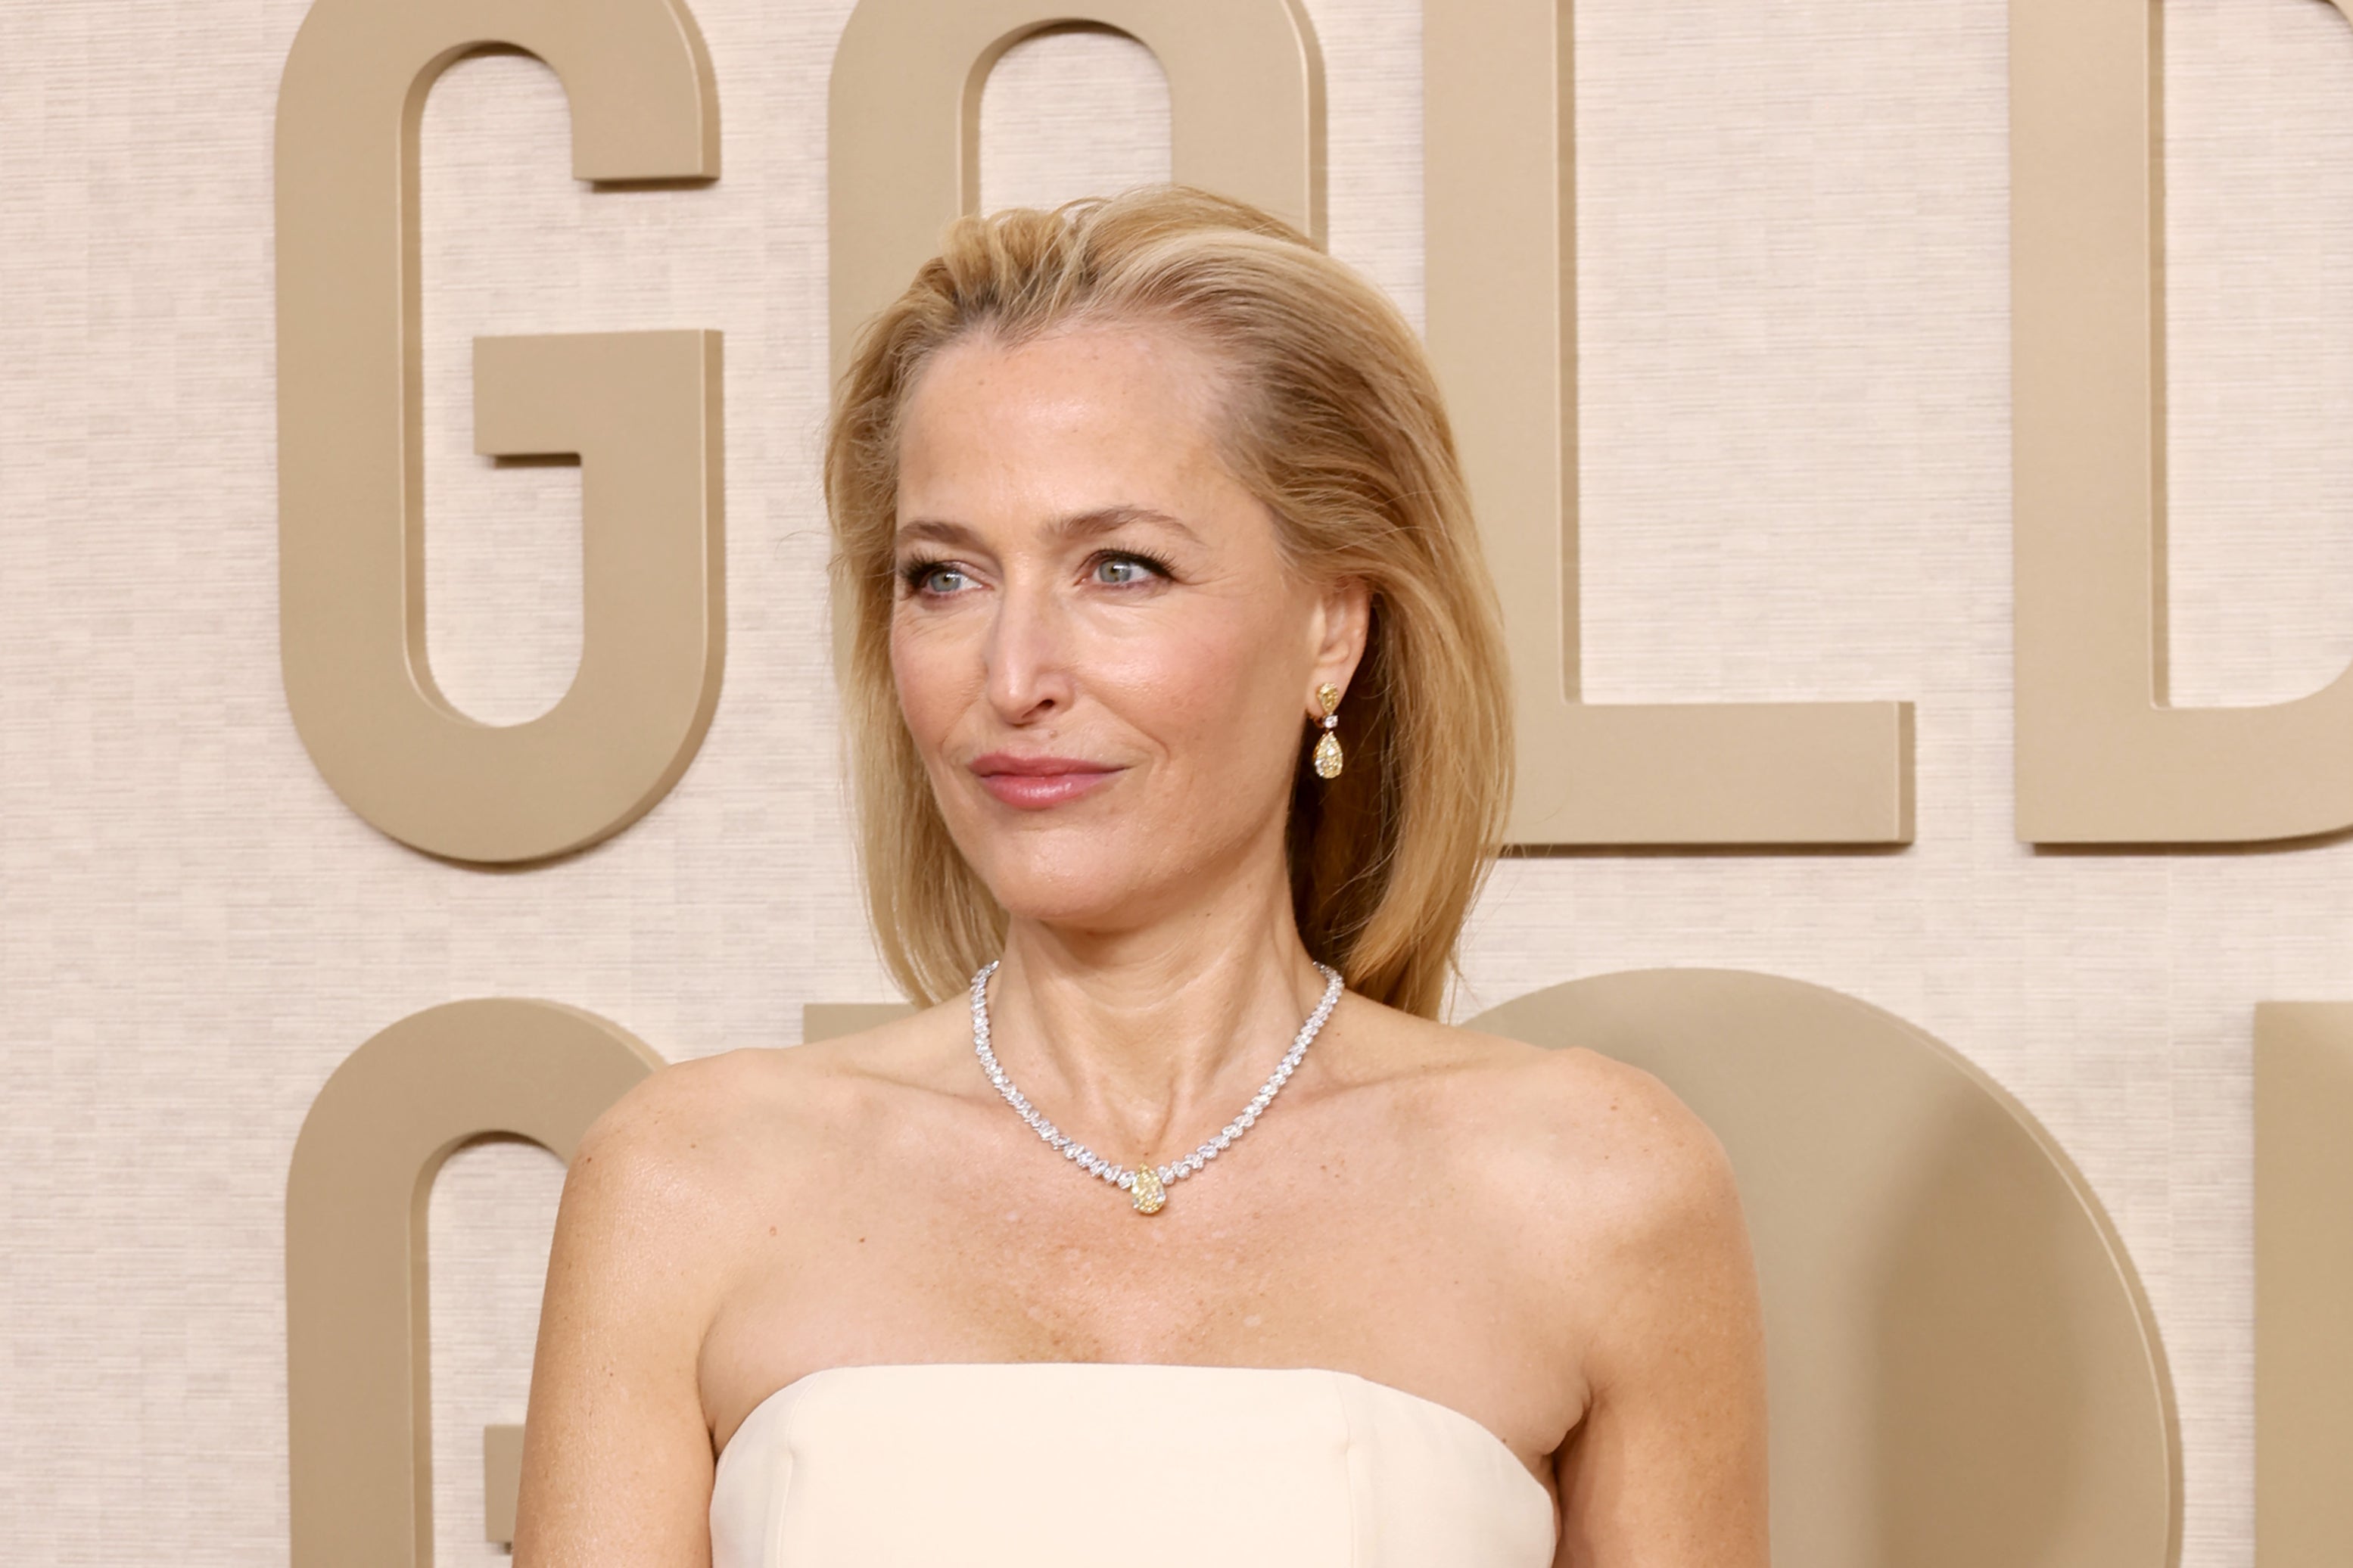 Gillian Anderson pictured at the Golden Globes in January